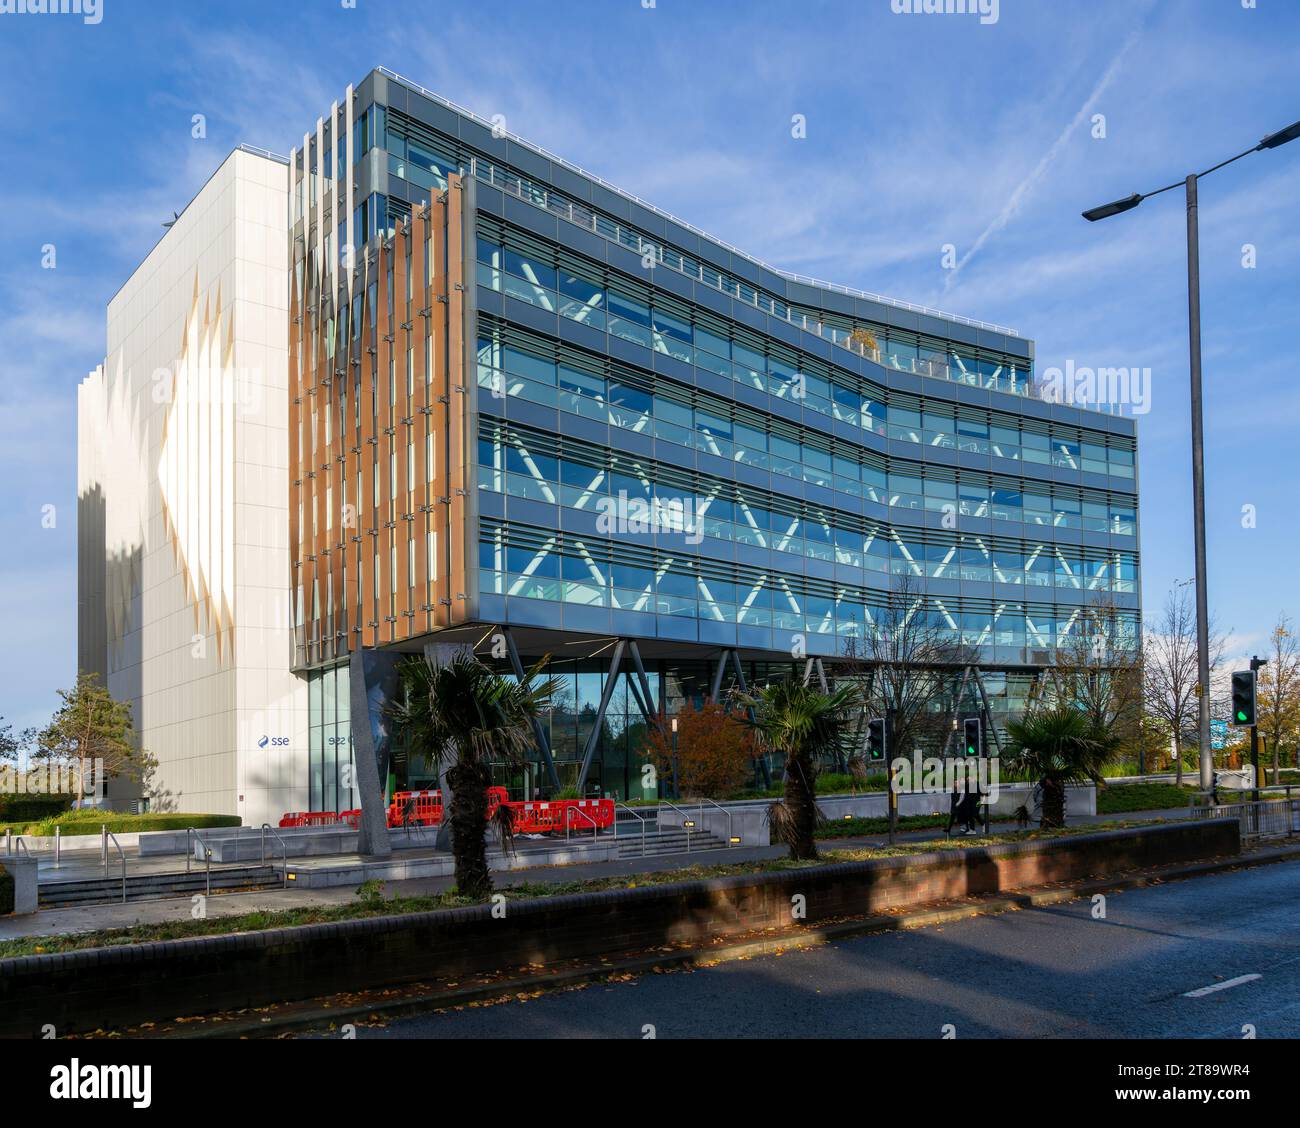 Modern architecture SSE office building, Forbury Place, Reading, Berkshire, England, UK Stock Photo